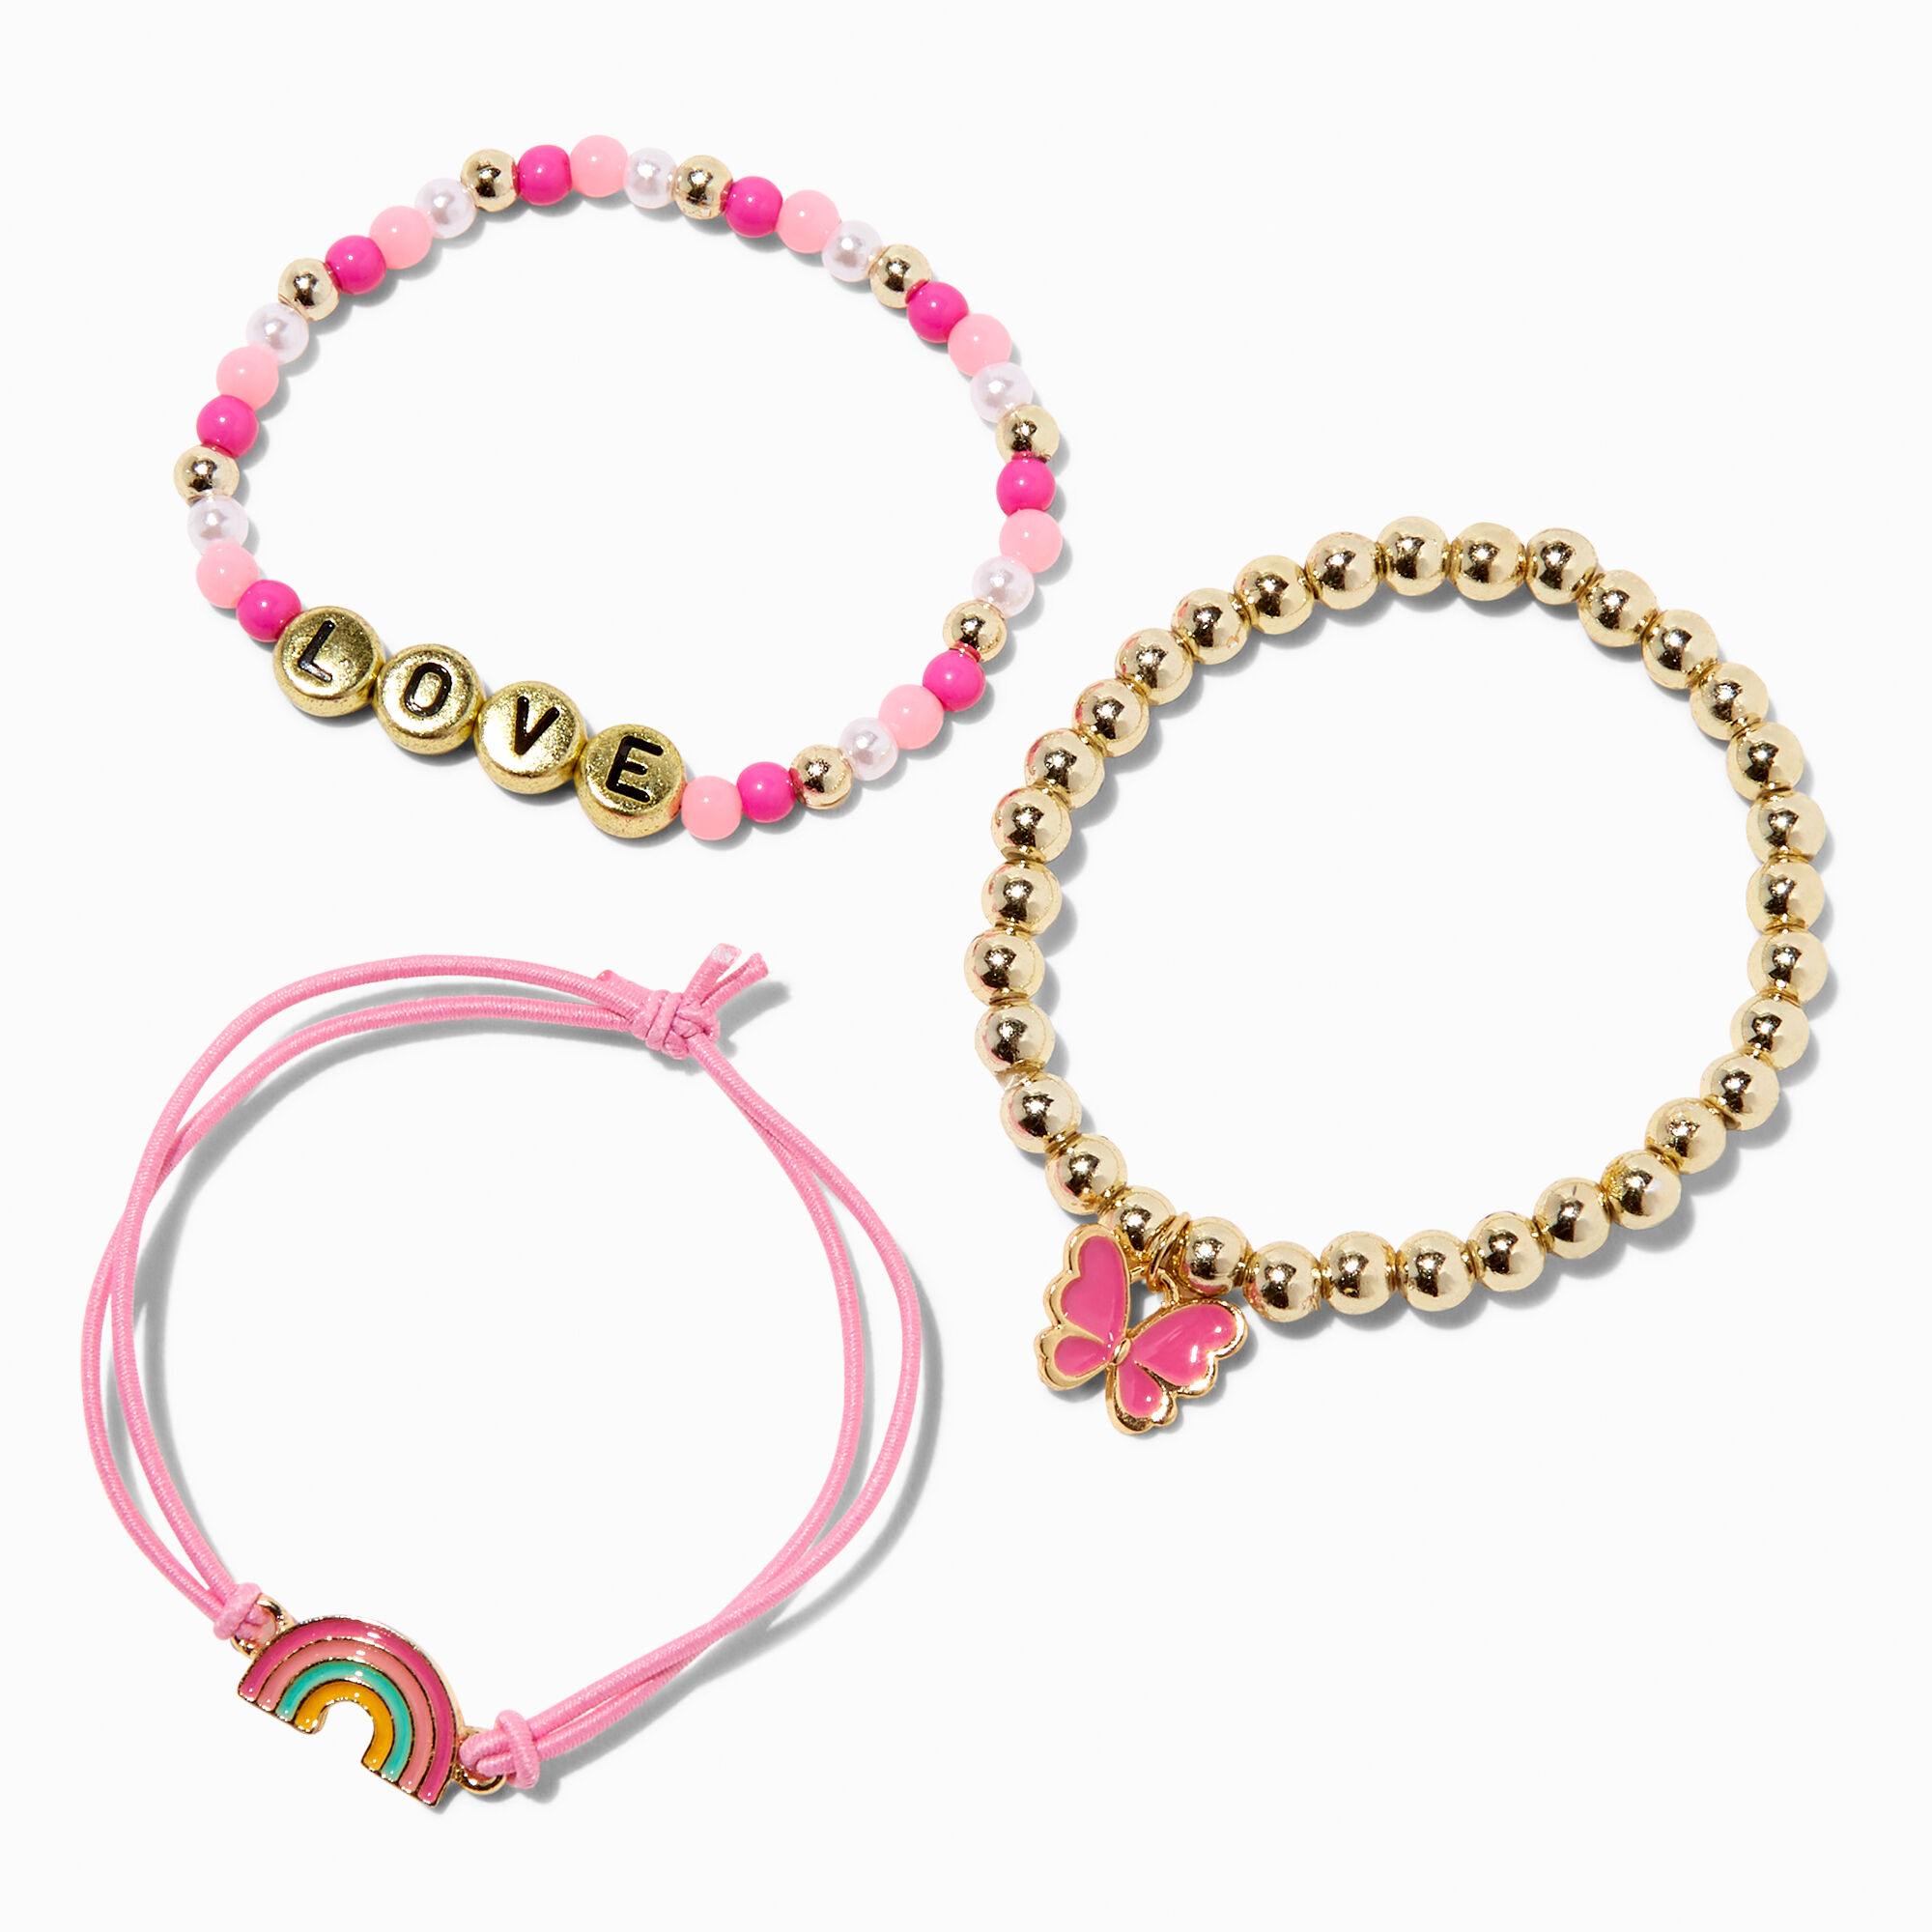 Candy Multicolored Coil Bracelets - 4 Pack | Claire's US